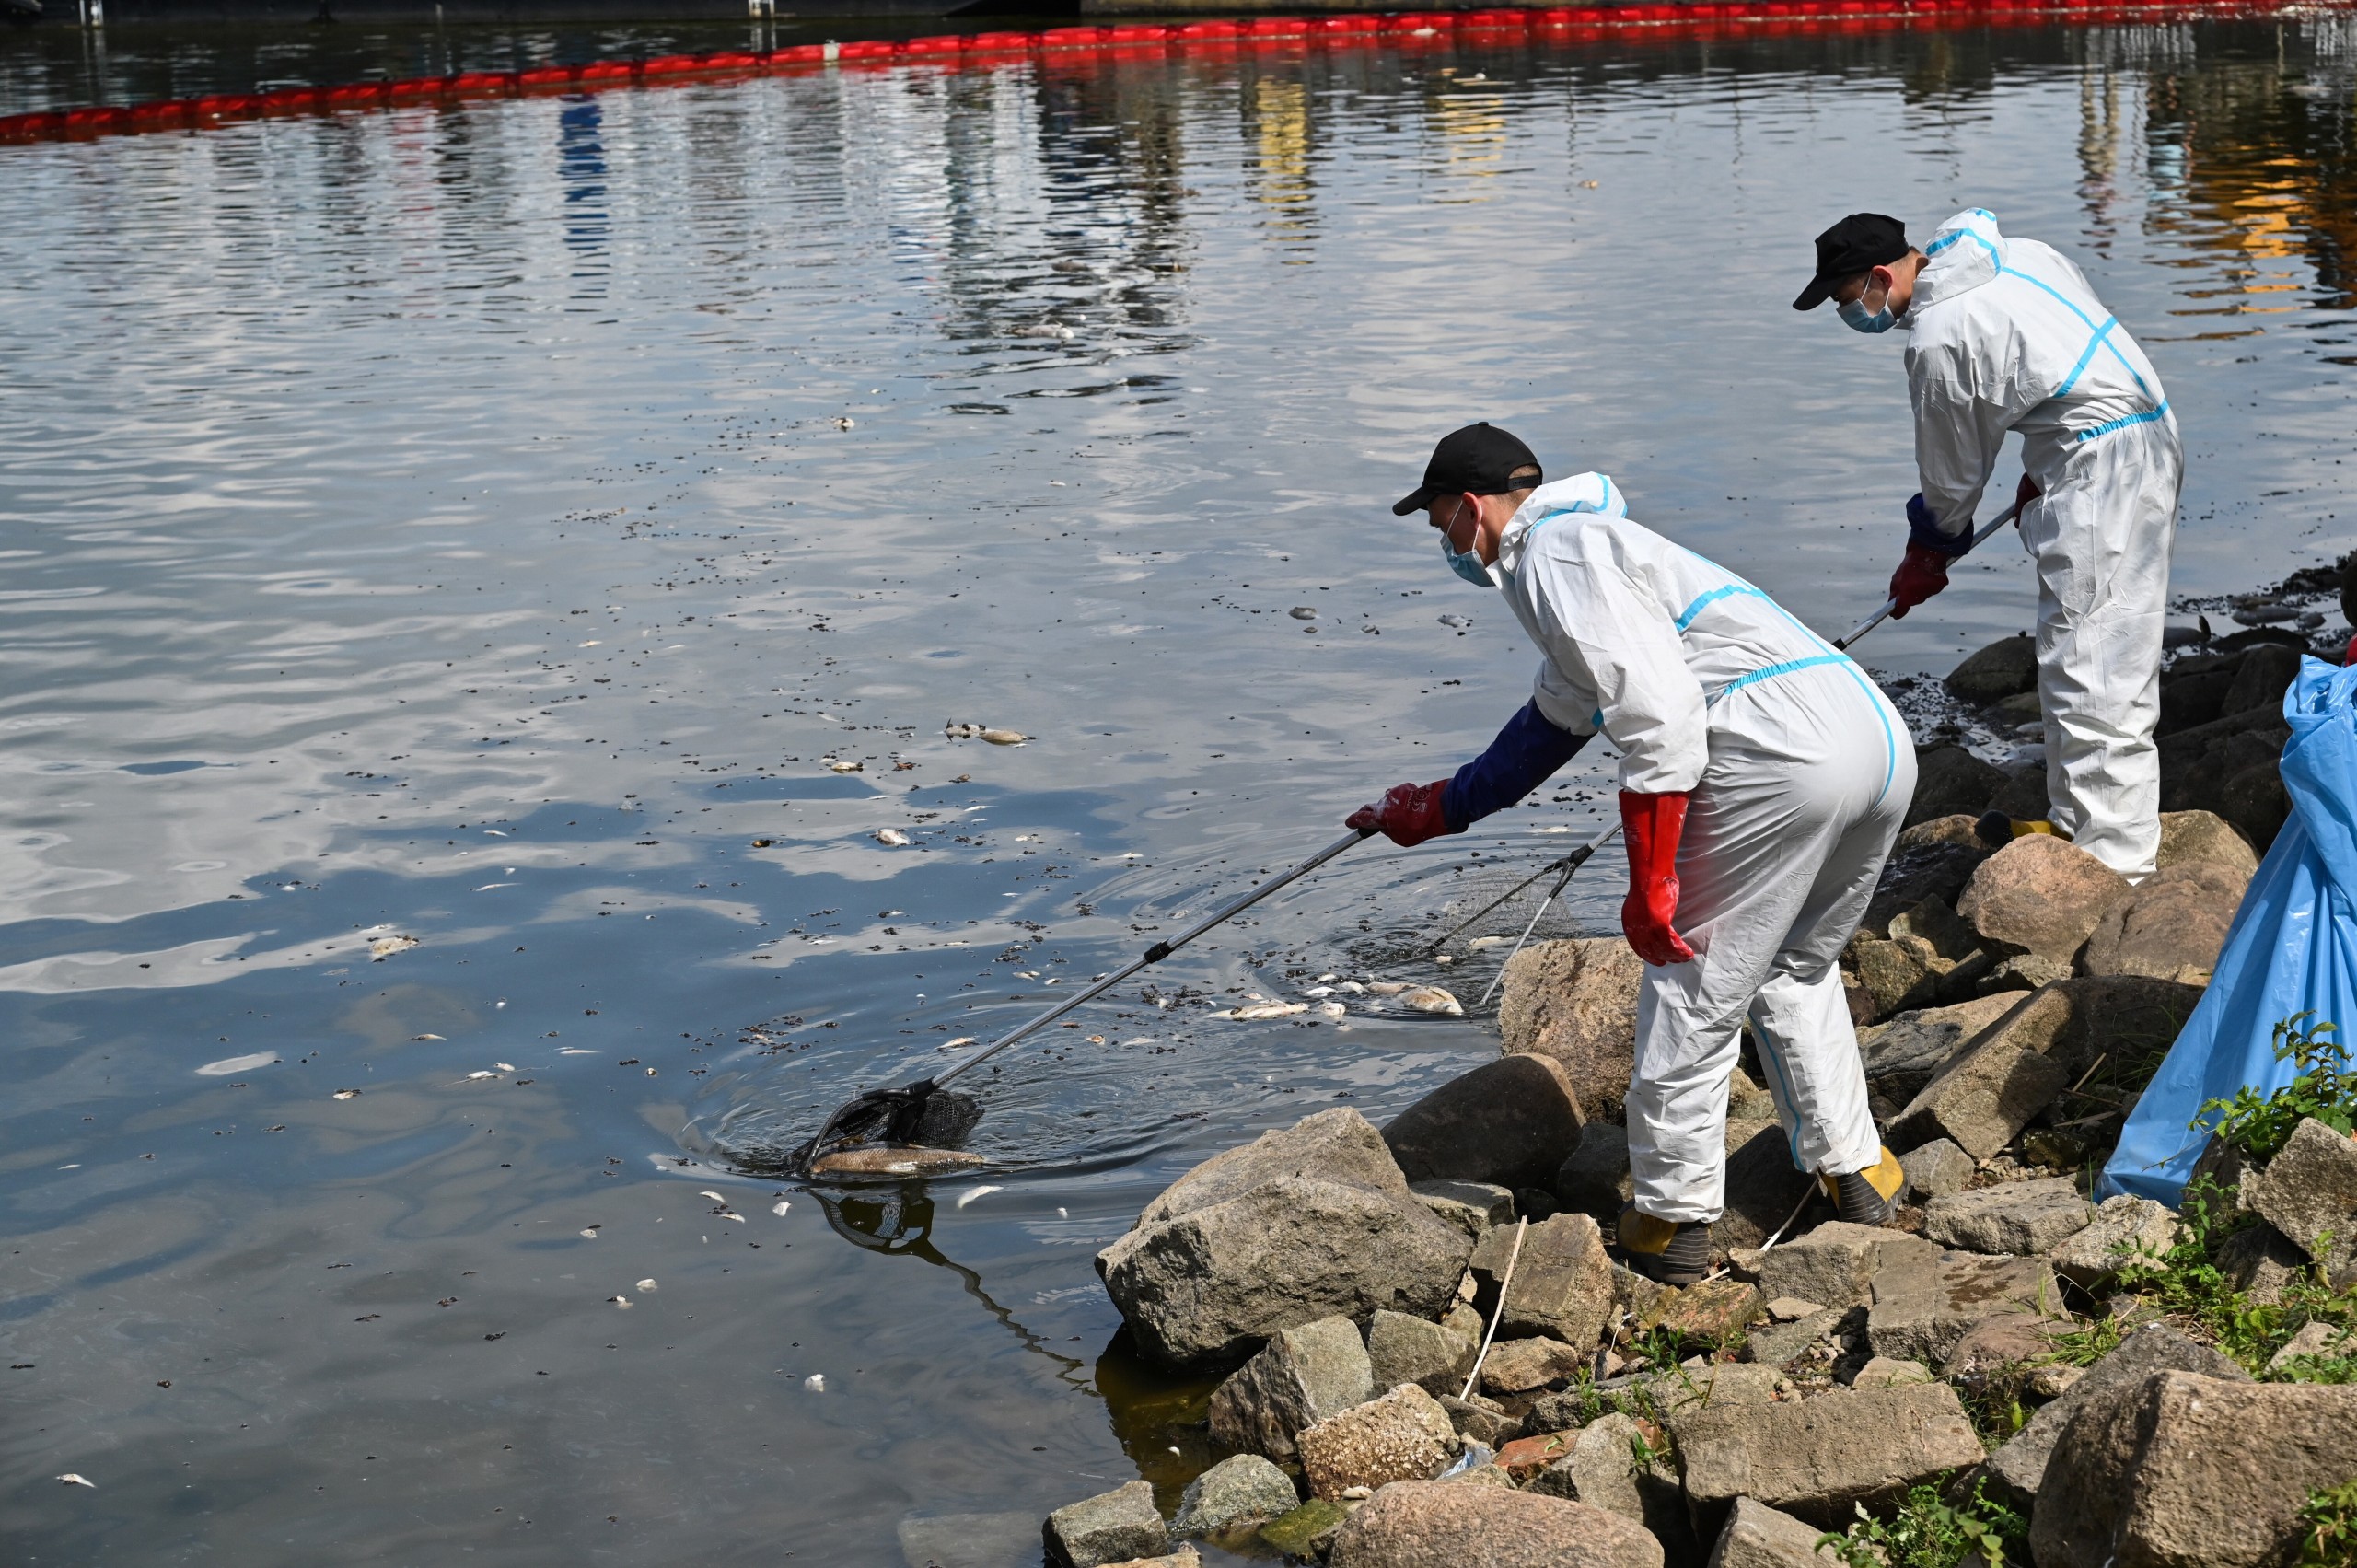 epa10122224 People in protective gear clean the Oder River after thousands of dead fish washed up on the river banks, in Krajnik Dolny village, Poland, 15 August 2022. The Oder river is suffering from an environmental disaster after over 10 tons of dead fish were spotted floating in its waters since July, although no toxic substances were detected, Poland's climate and environment minister said. The exact cause of the mass fish die-off, which was labeled as an 'ecological disaster,' remains unclear.  EPA/Marcin Bielecki POLAND OUT